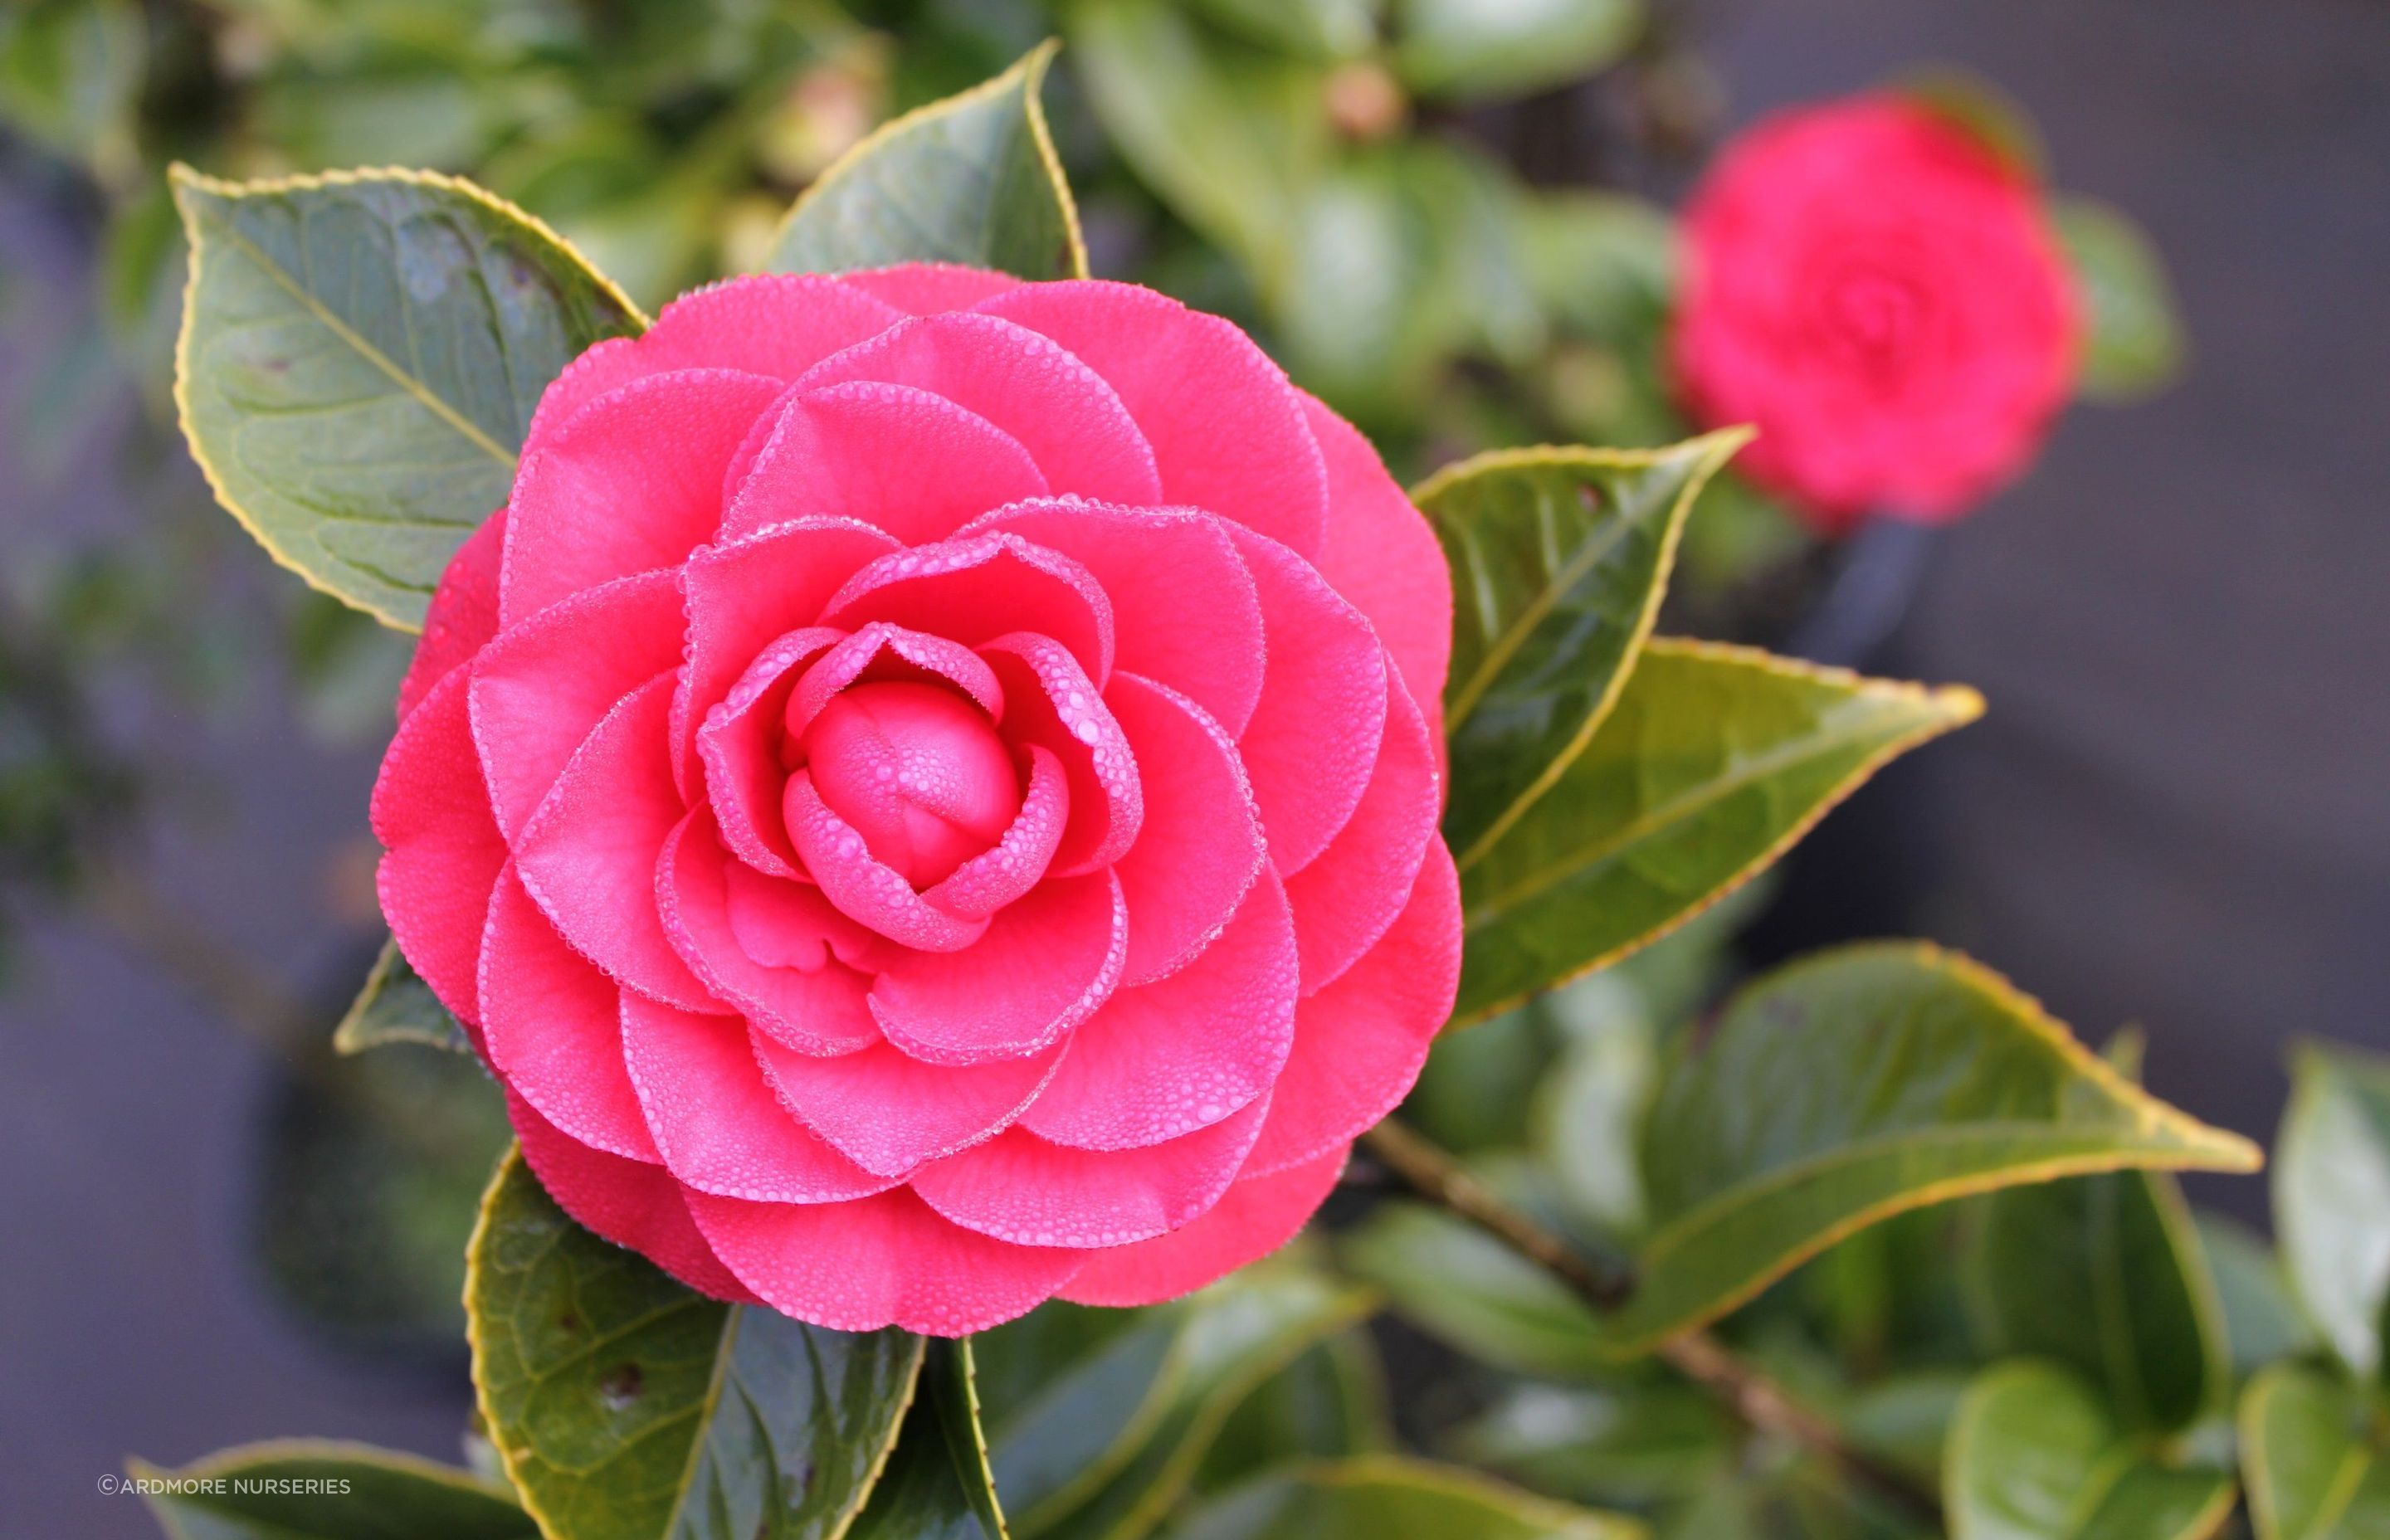 The Camellia Japonica 'Roger Hall' features magnificent bright red flowers and has an upright growth habit, making it well suited to small gardens.